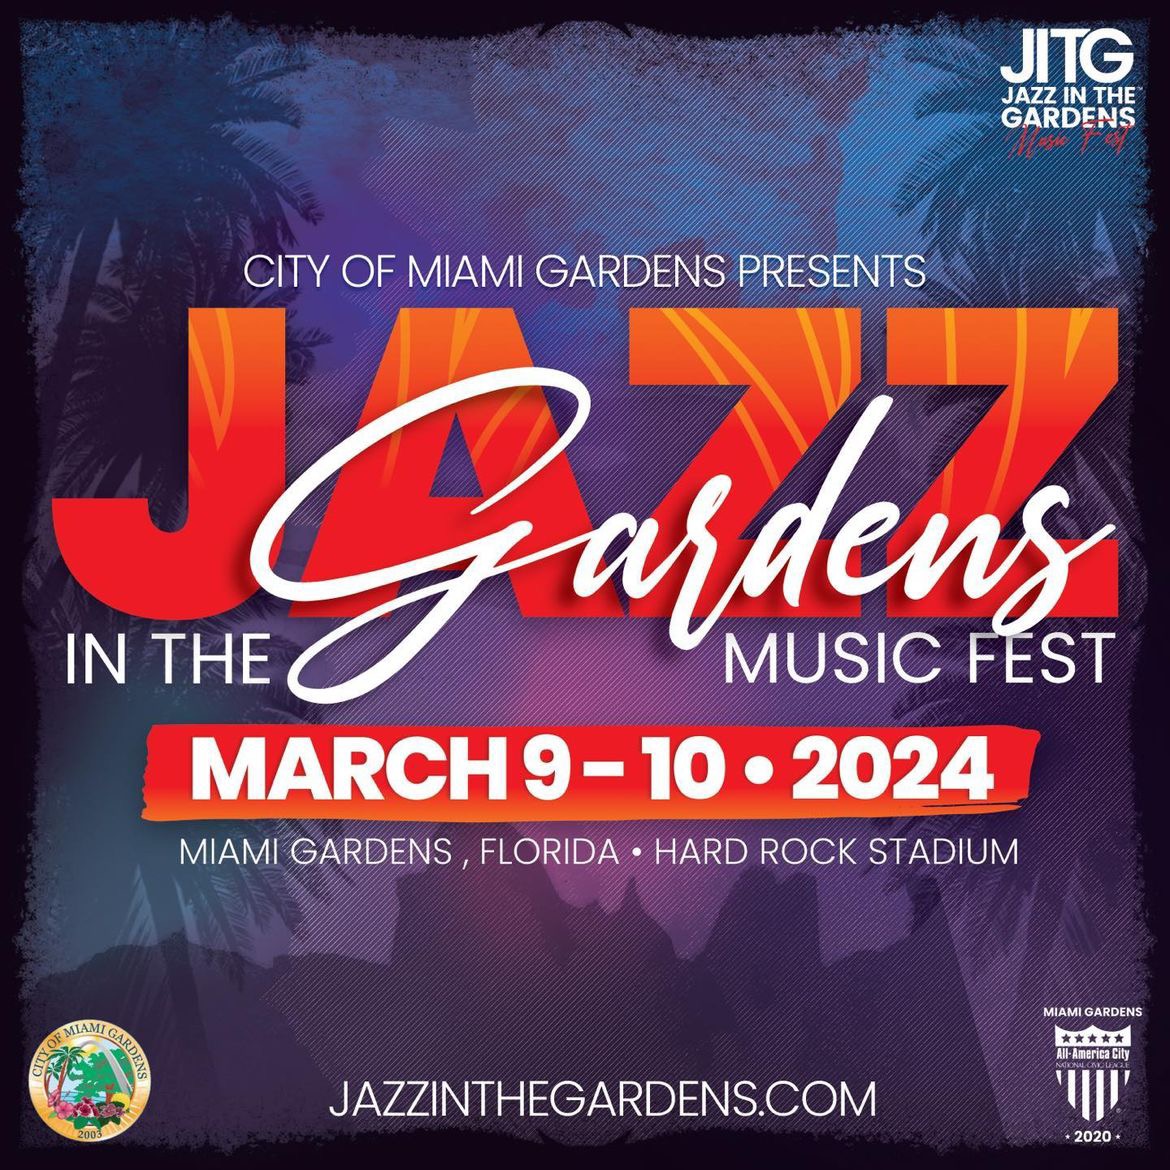 17th Annual Jazz In The Gardens Music Festival